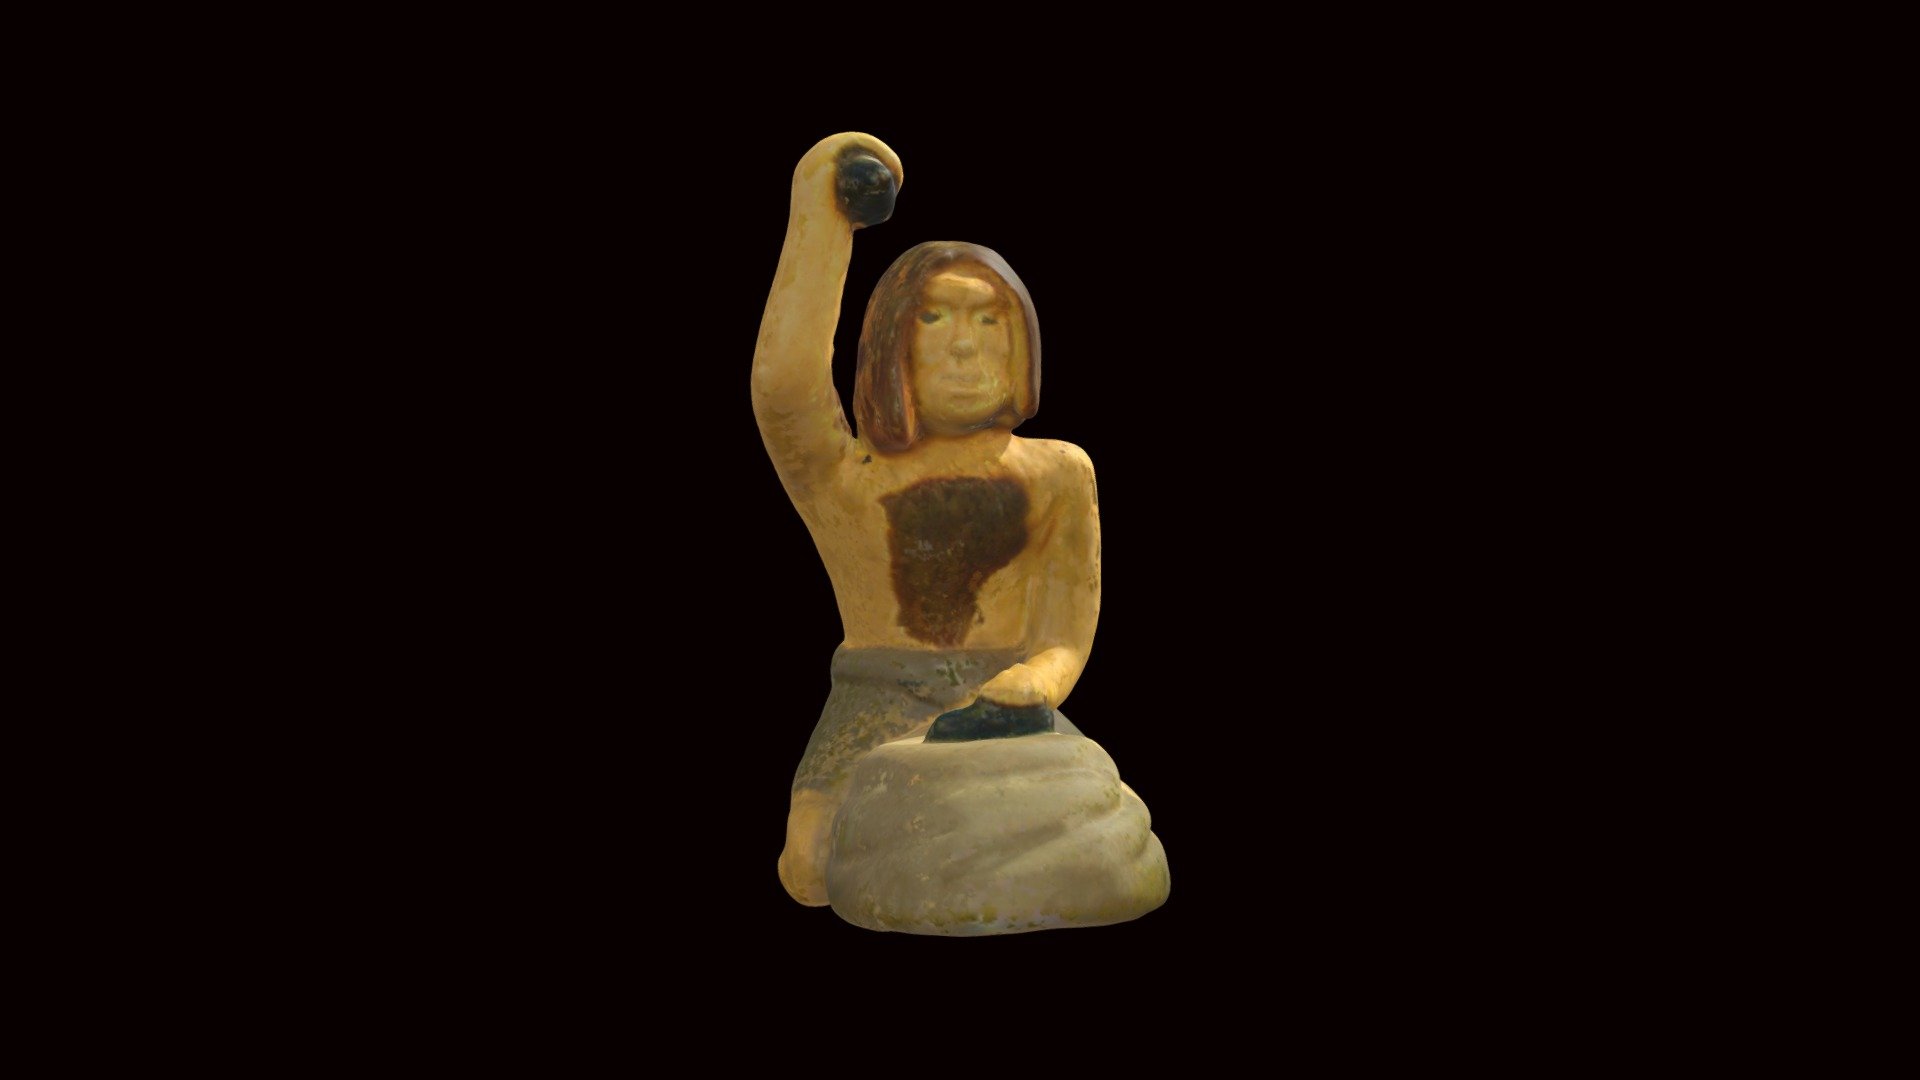 This rubber figurine was purchased as part of a &ldquo;caveman